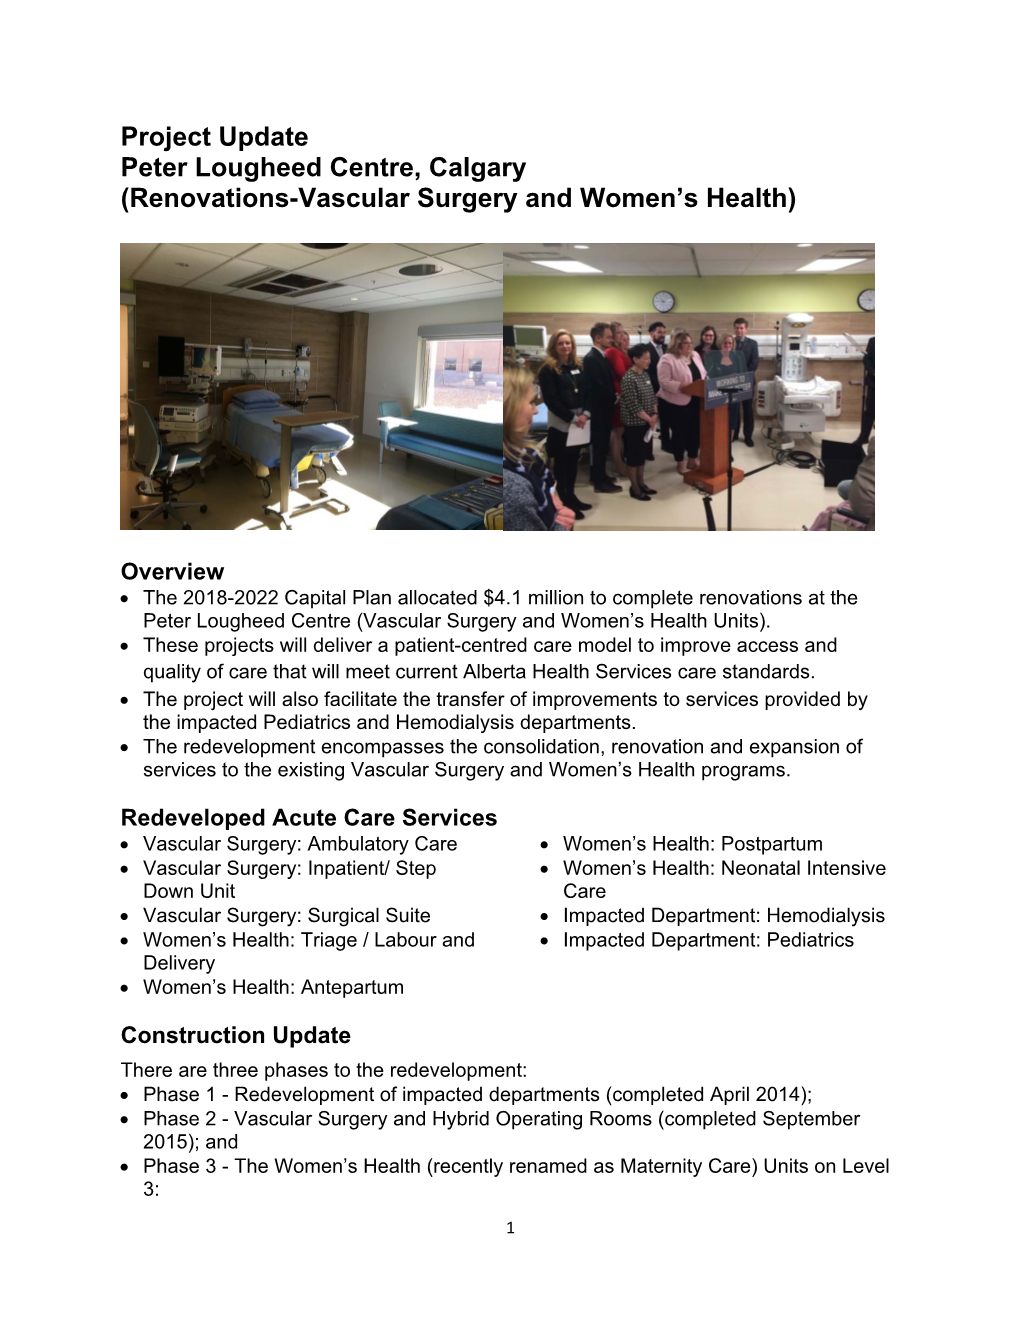 Project Update Peter Lougheed Centre, Calgary (Renovations-Vascular Surgery and Women's Health)